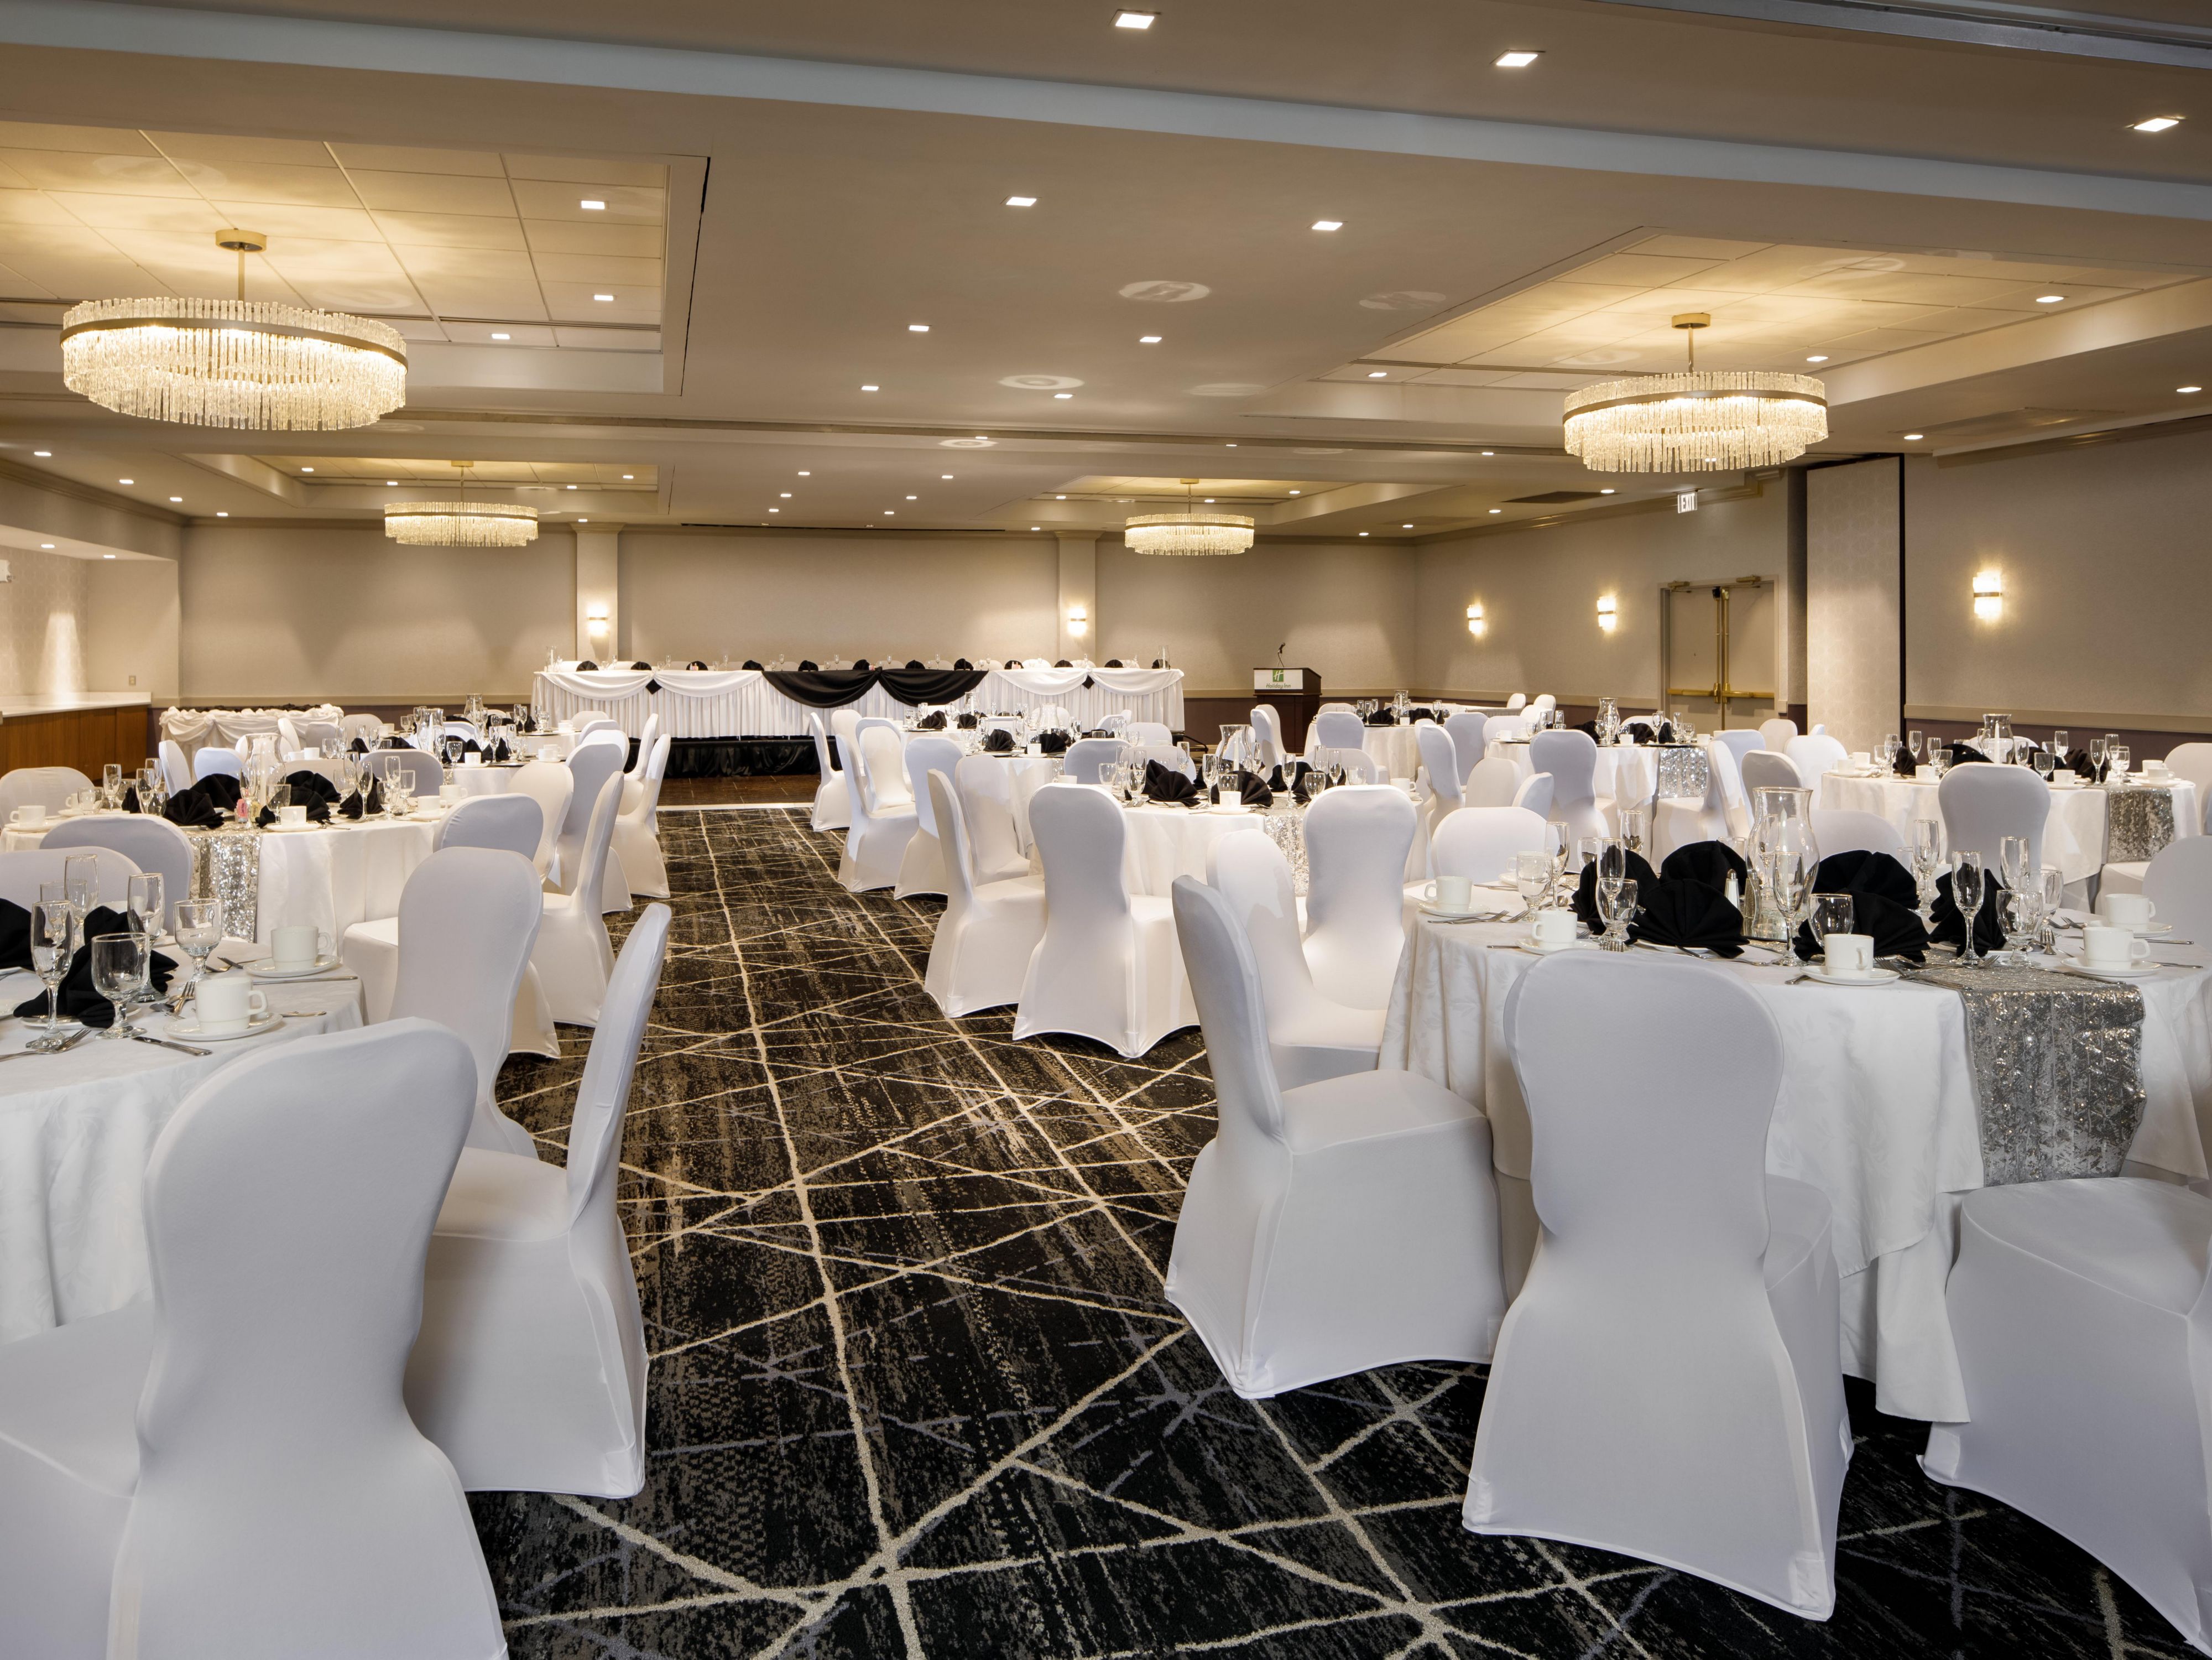 Hosting a business or social event in the DC area? We offer 10,000 square feet of contemporary event space with ten flexible meeting rooms, audiovisual equipment, and free Wi-Fi. Our dedicated staff is ready to help with event planning, catering services, and group accommodations. 